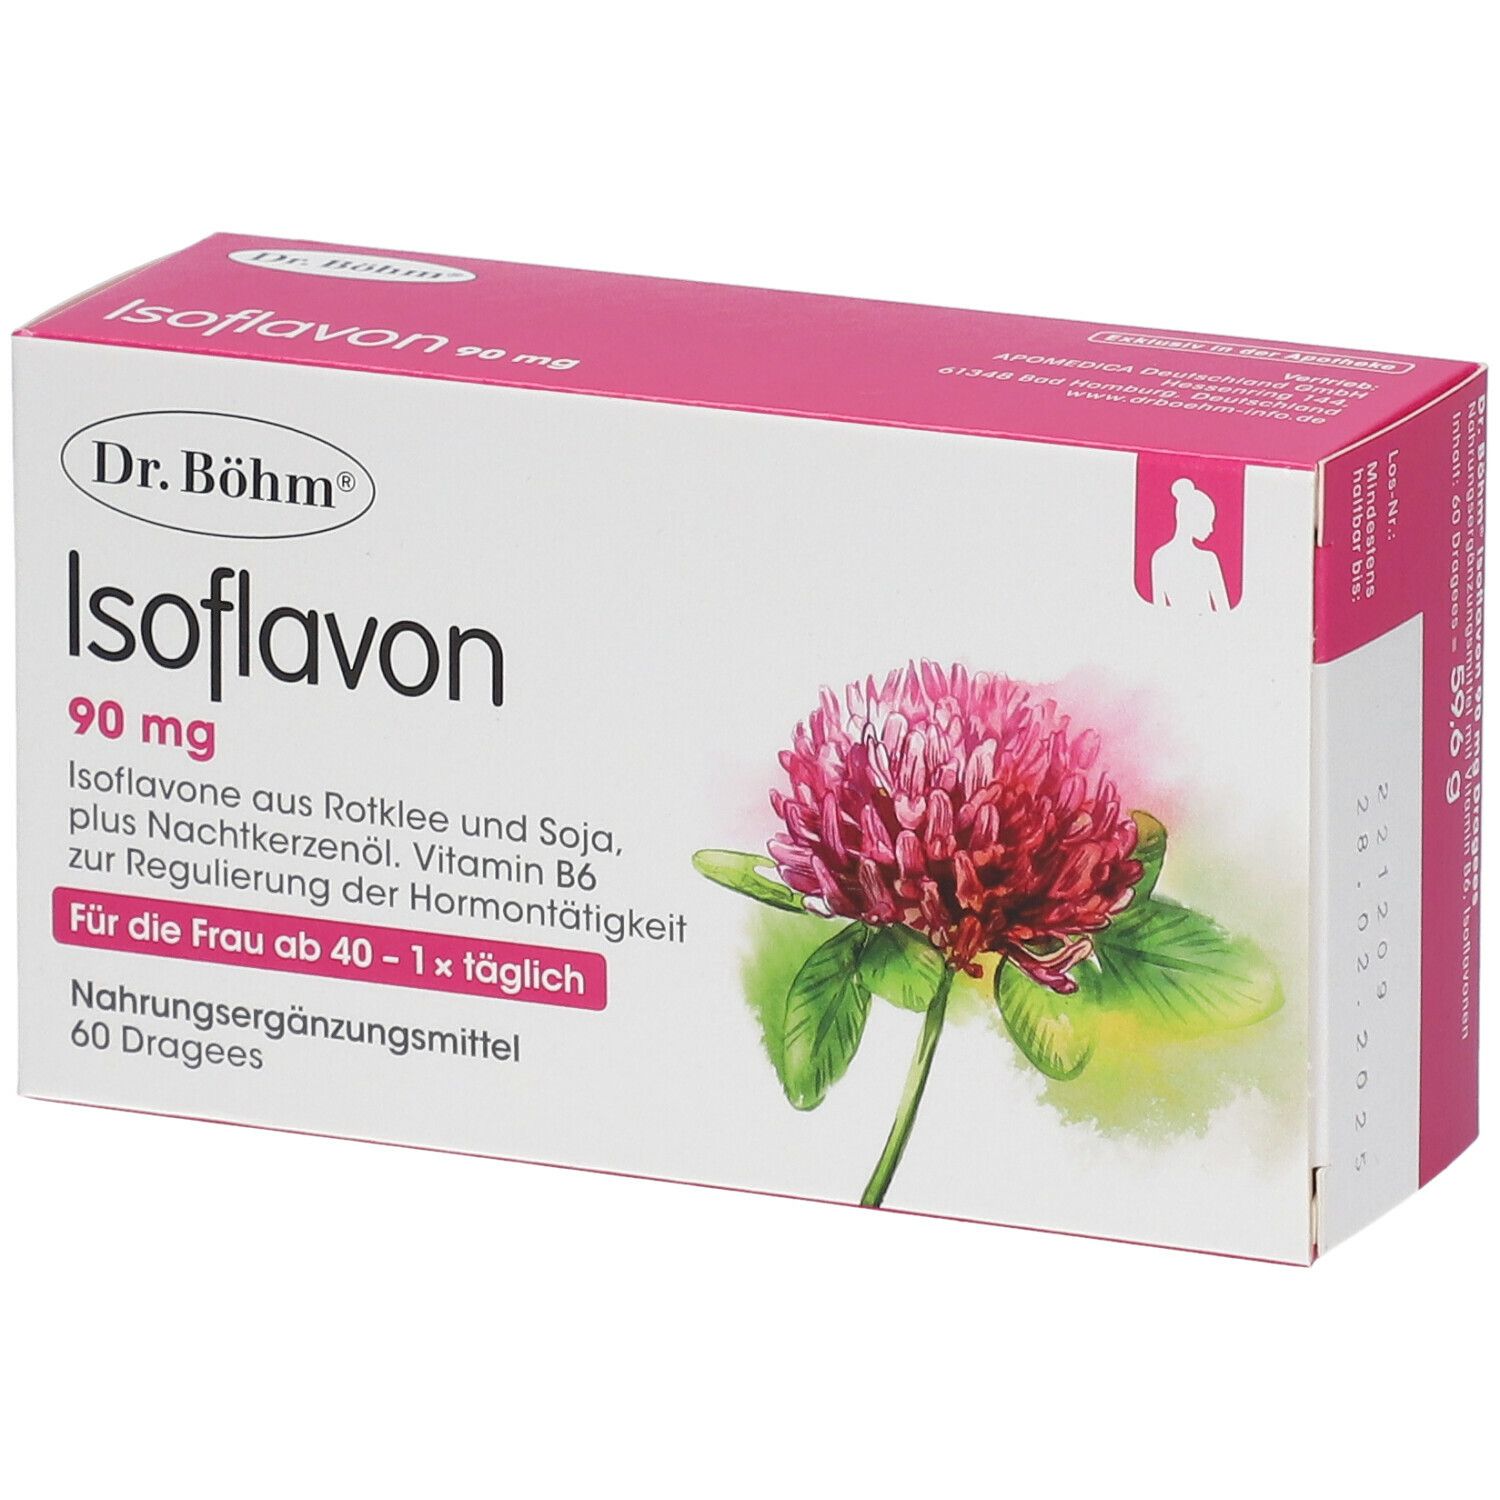 Dr. Böhm® Isoflavone 90 mg Dragees